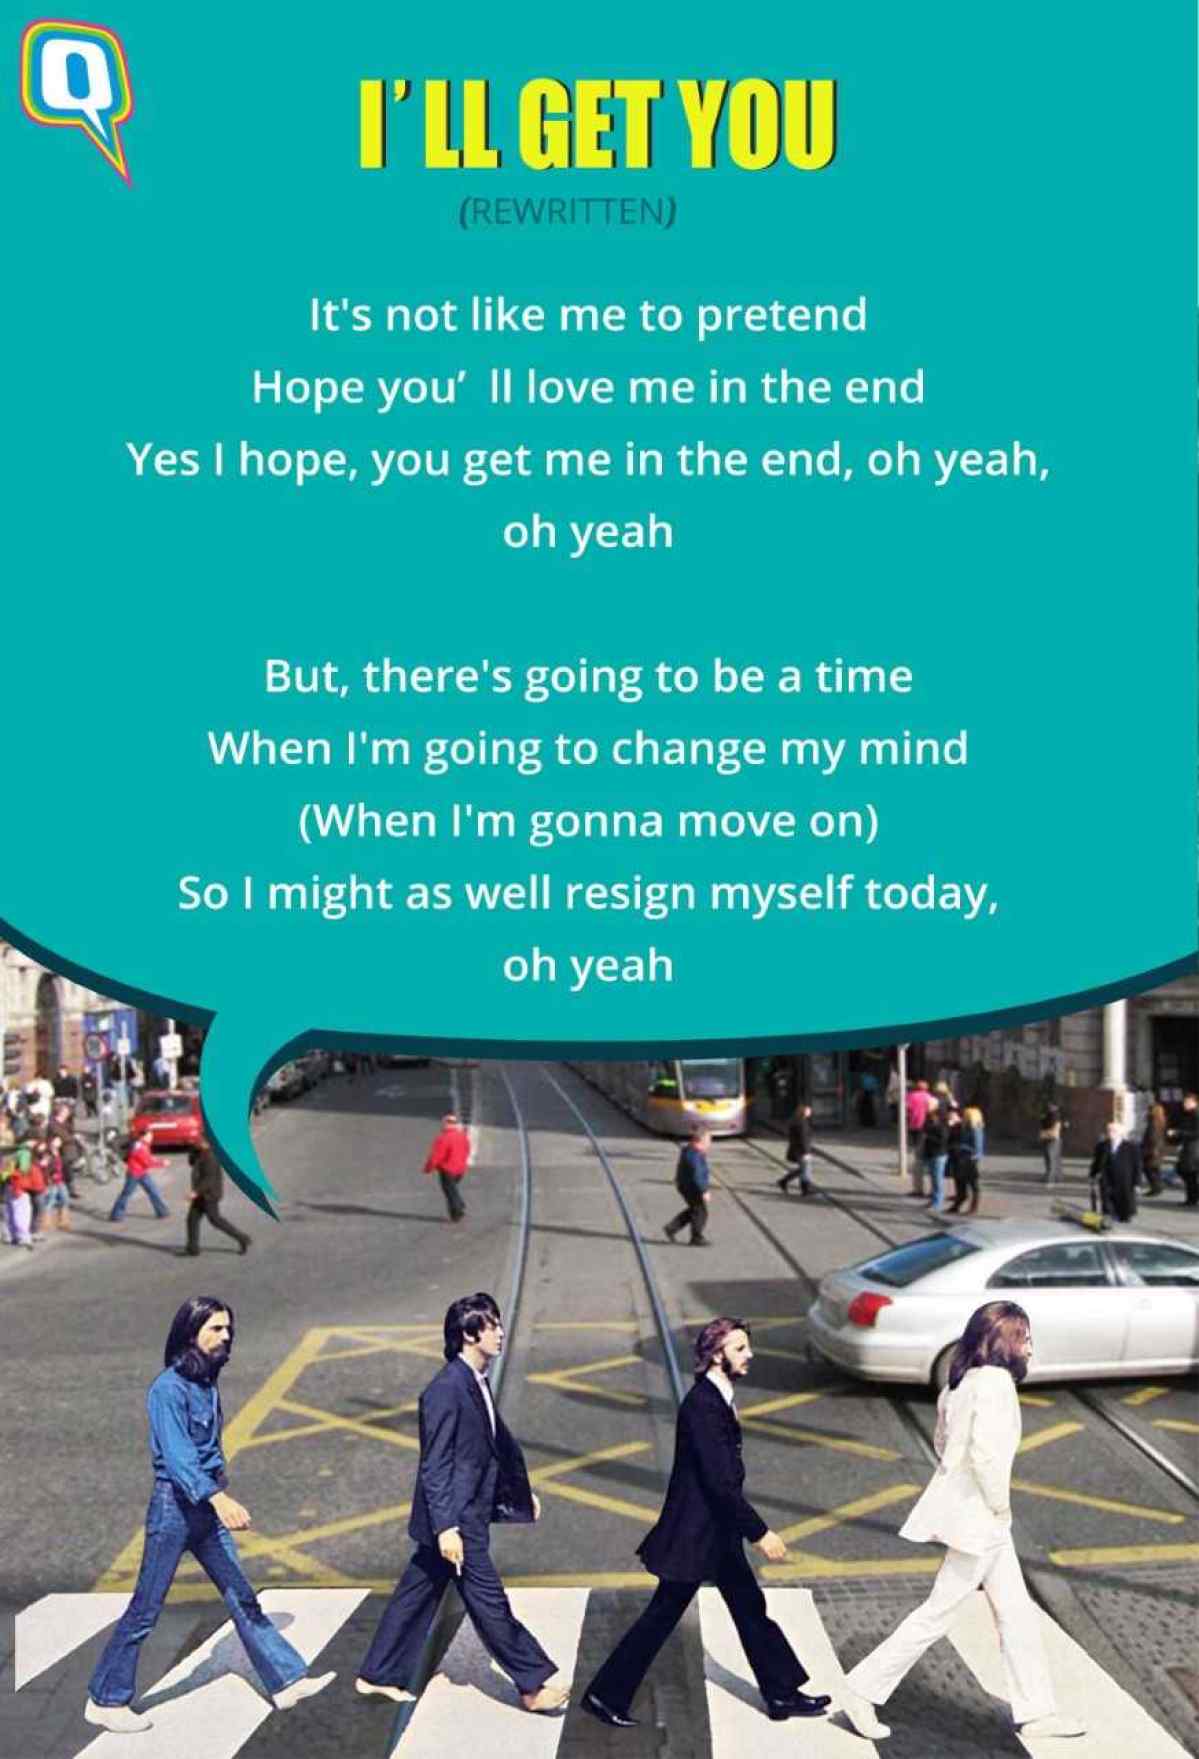 How The Beatles would have rewritten ‘I’ll Get You’ if they were millennials.